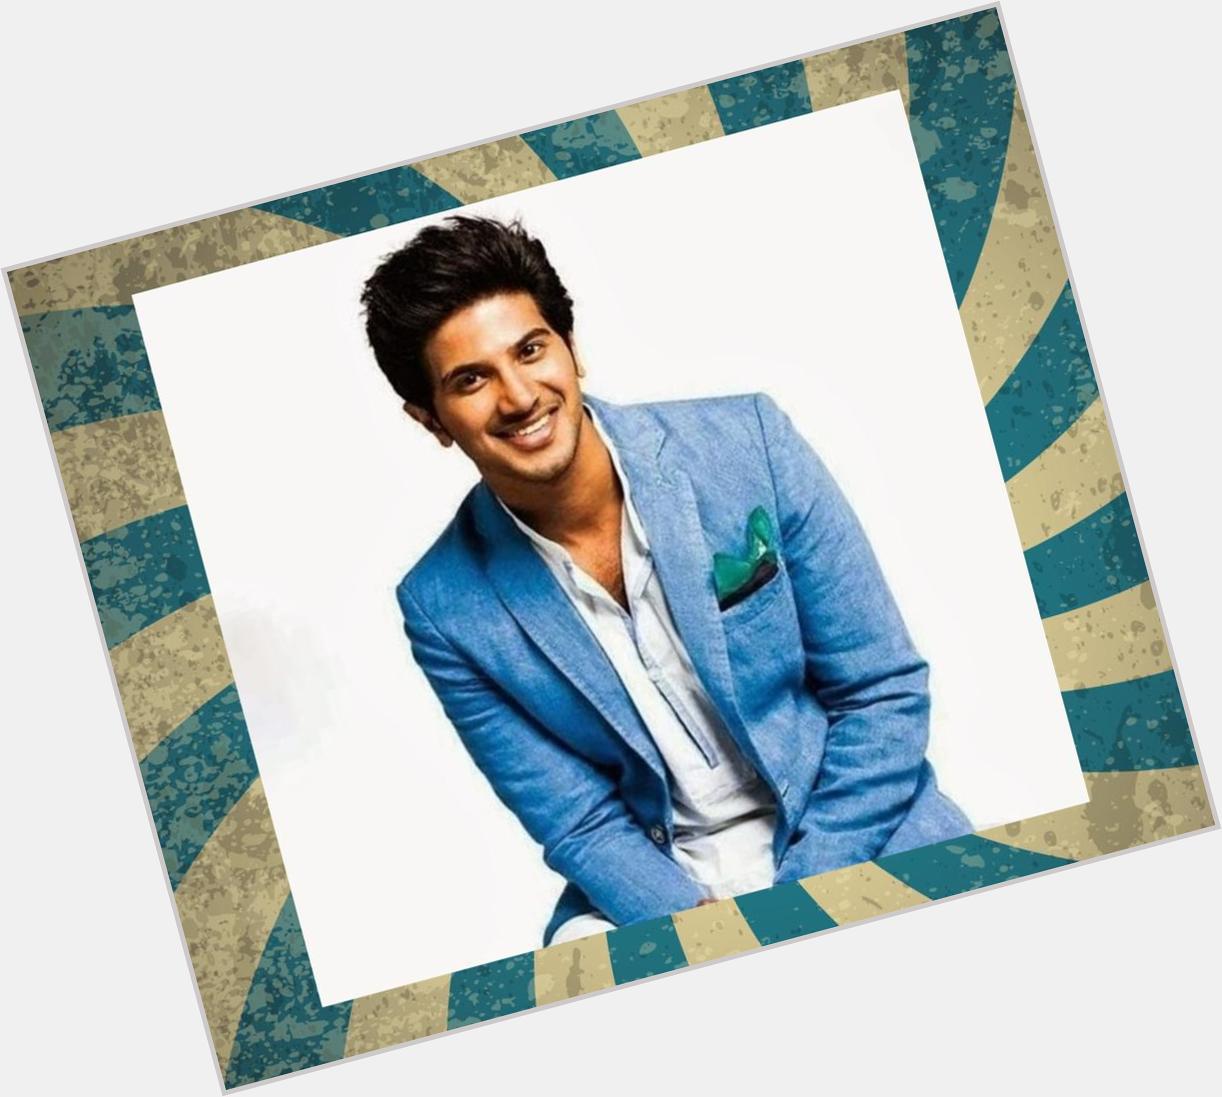   wishes Dulquer Salmaan, a very happy birthday.  